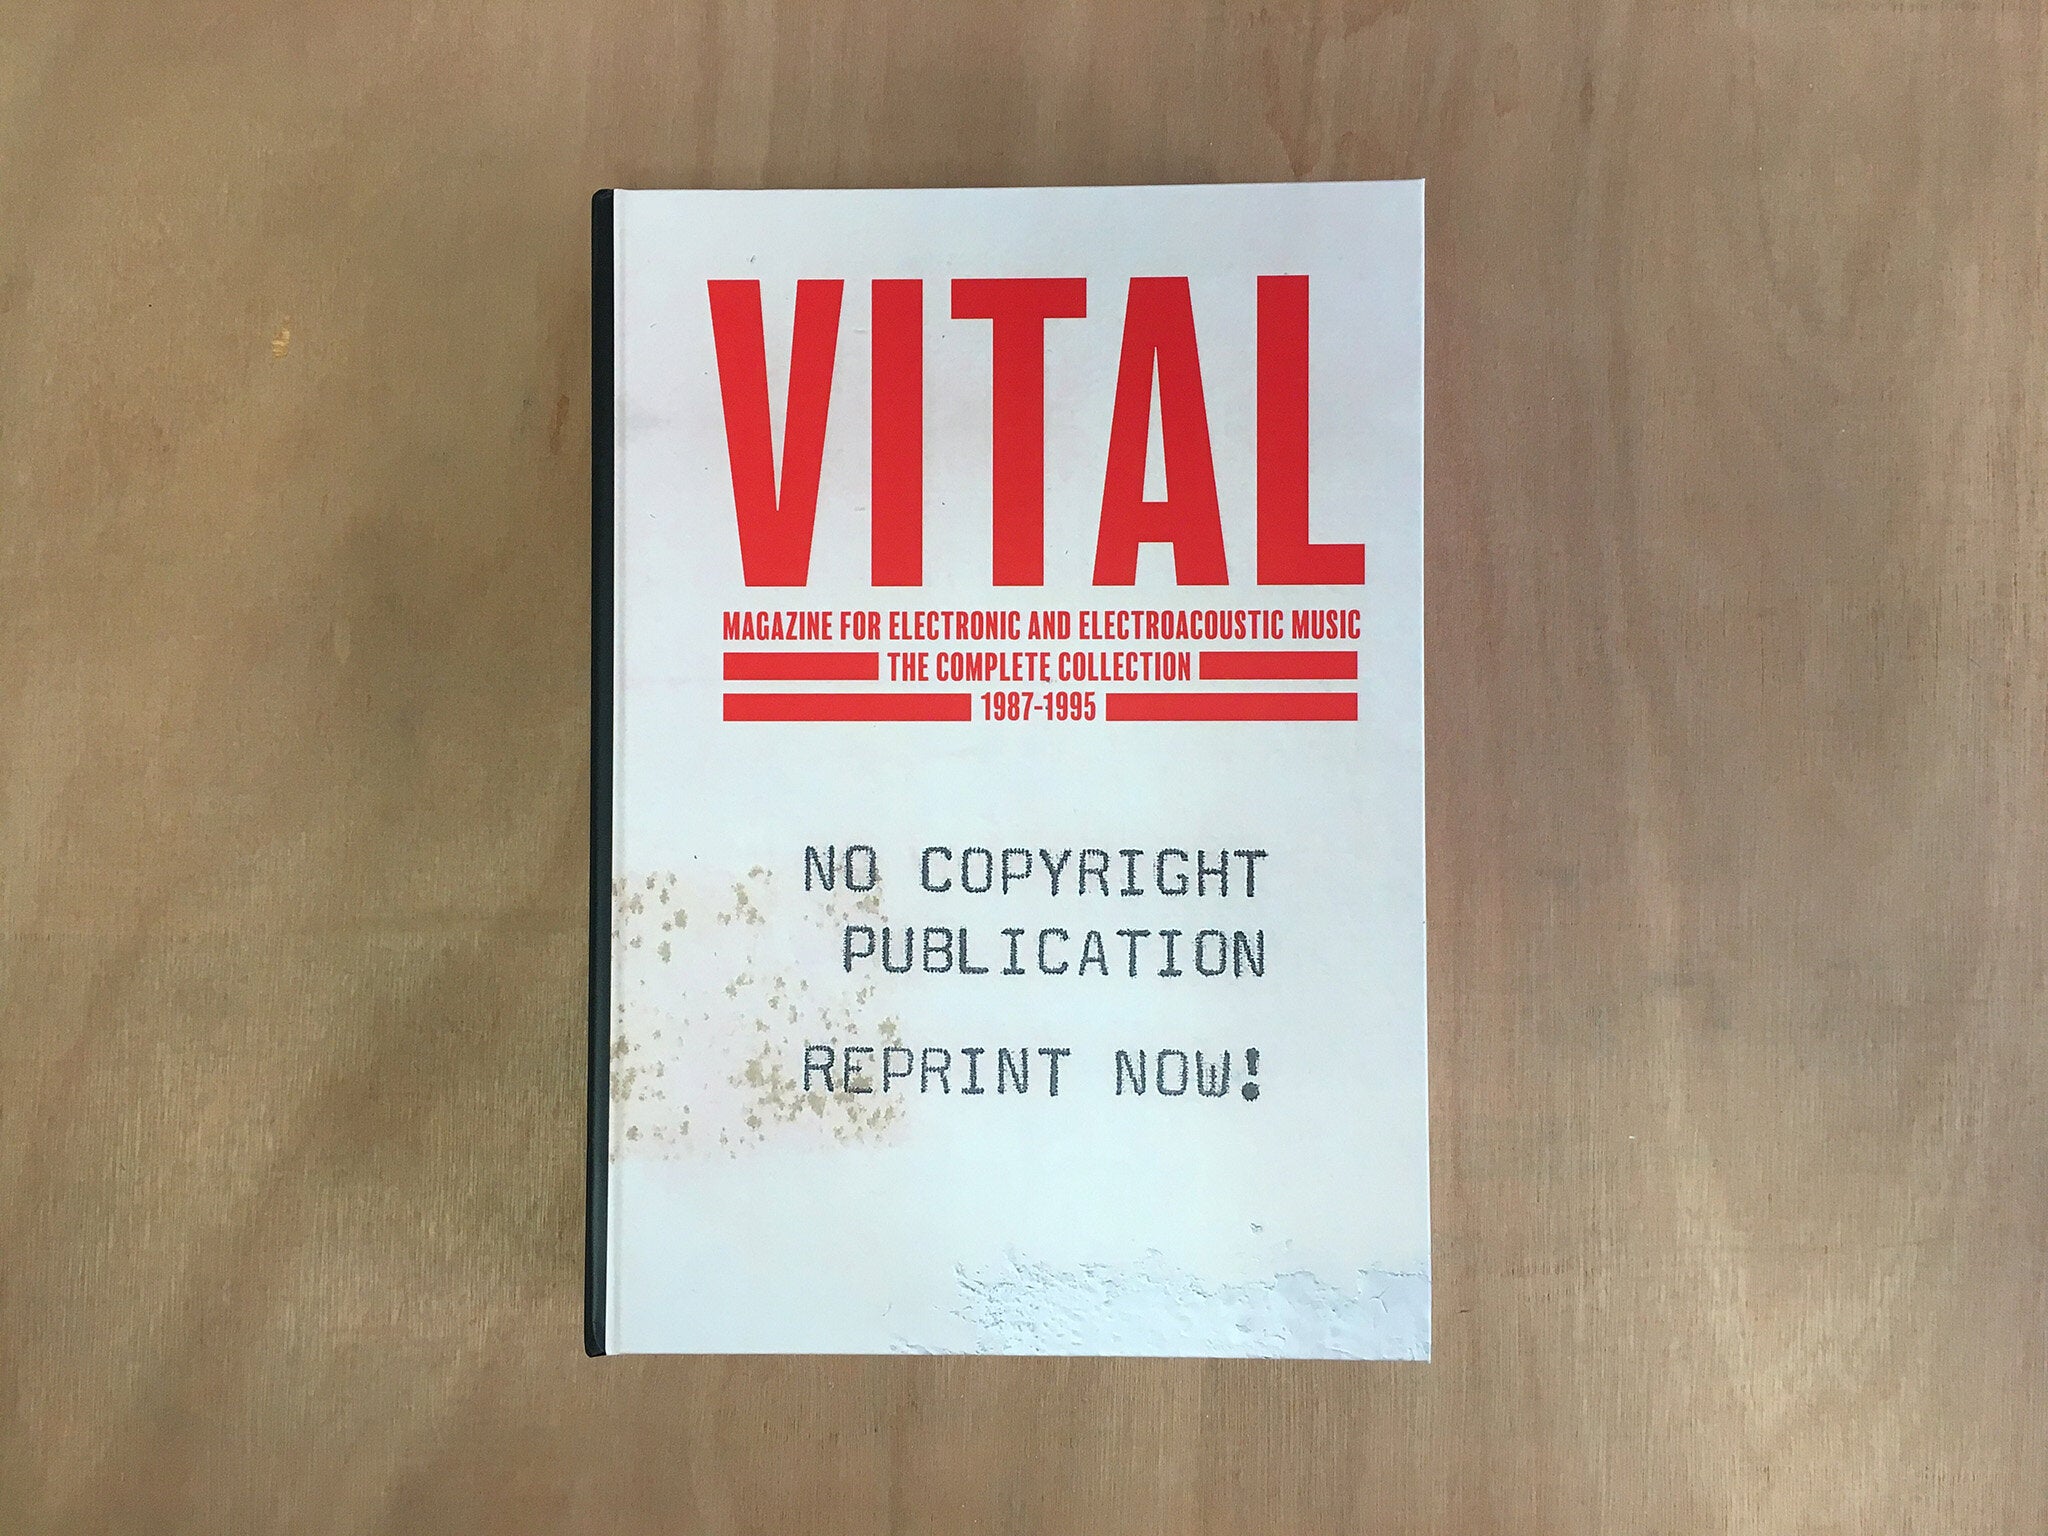 VITAL: THE COMPLETE COLLECTION 1987-1995 by Frans de Waard